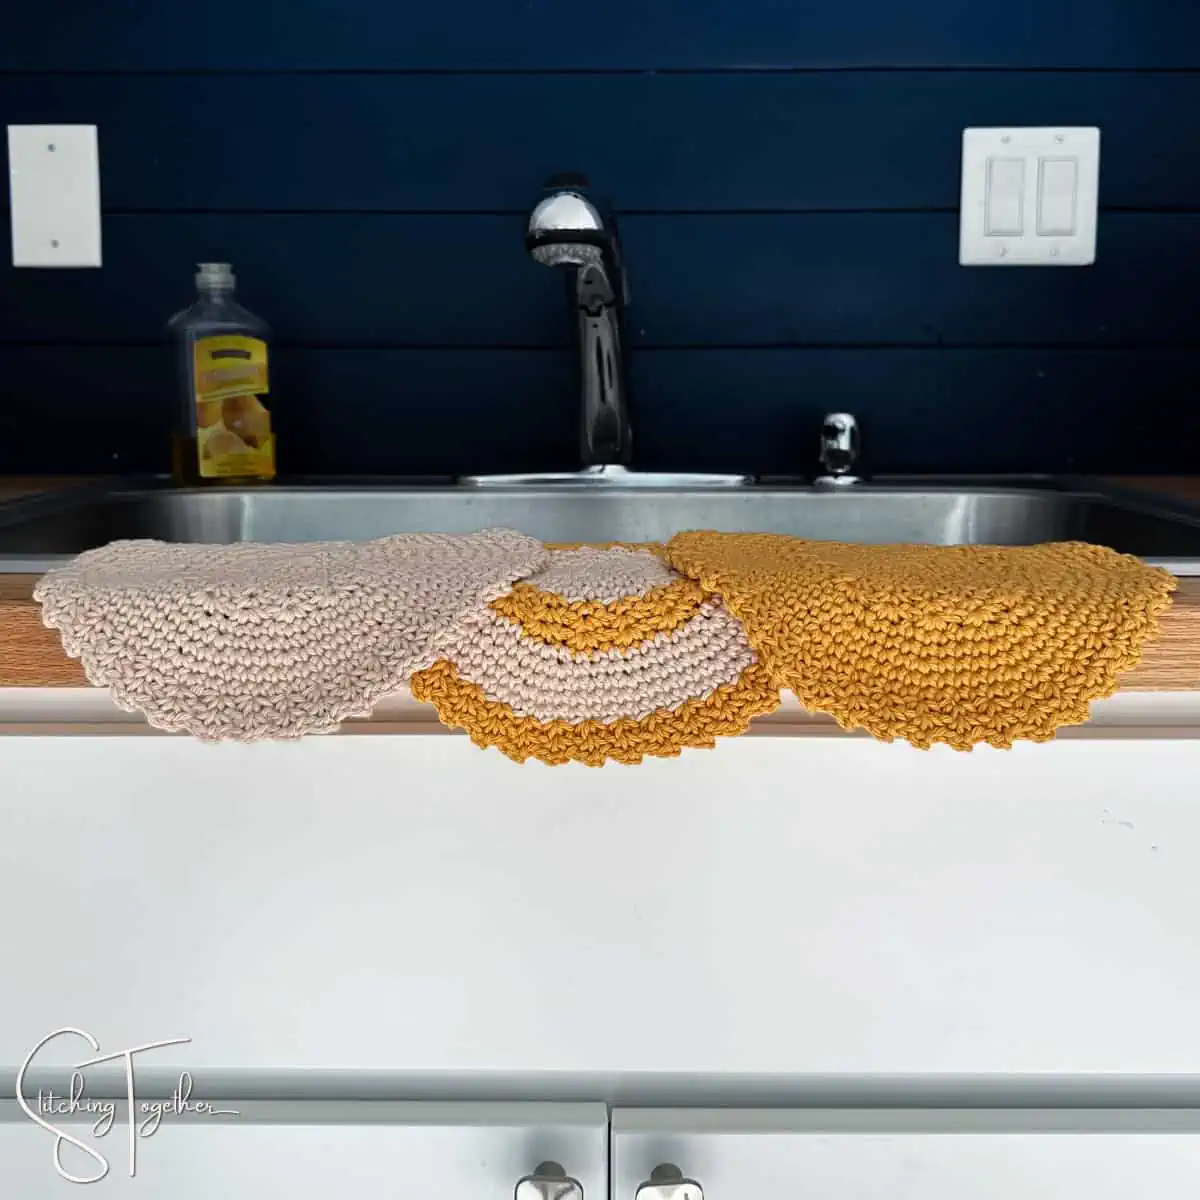 3 crochet round dishcloths draped on the side of a sink